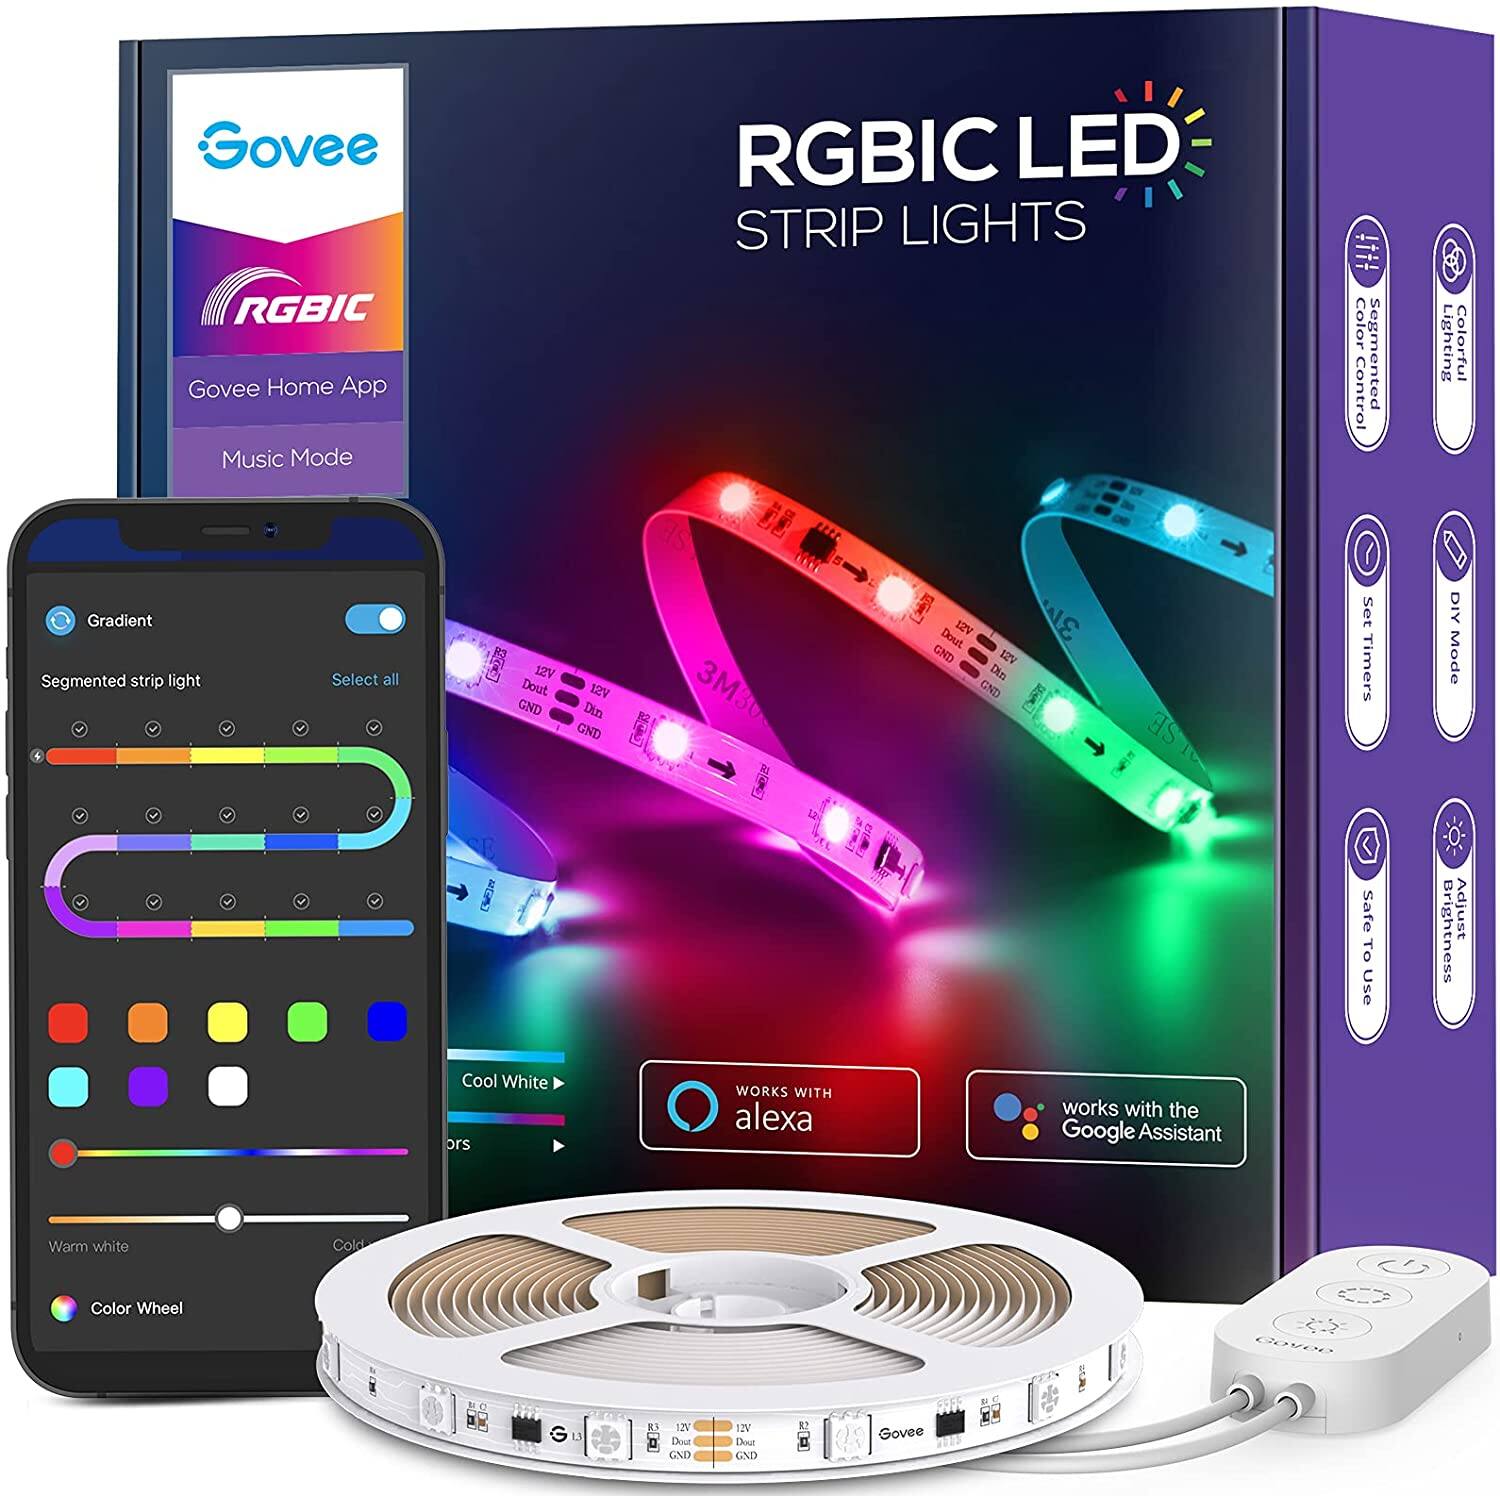 Govee RGBIC Alexa LED Strip Lights, Smart Segmented Color Control, WiFi, App LED Lights Work with Alexa and Google Assistant, Music Sync, 16.4ft - $22.39 + Free Shipping